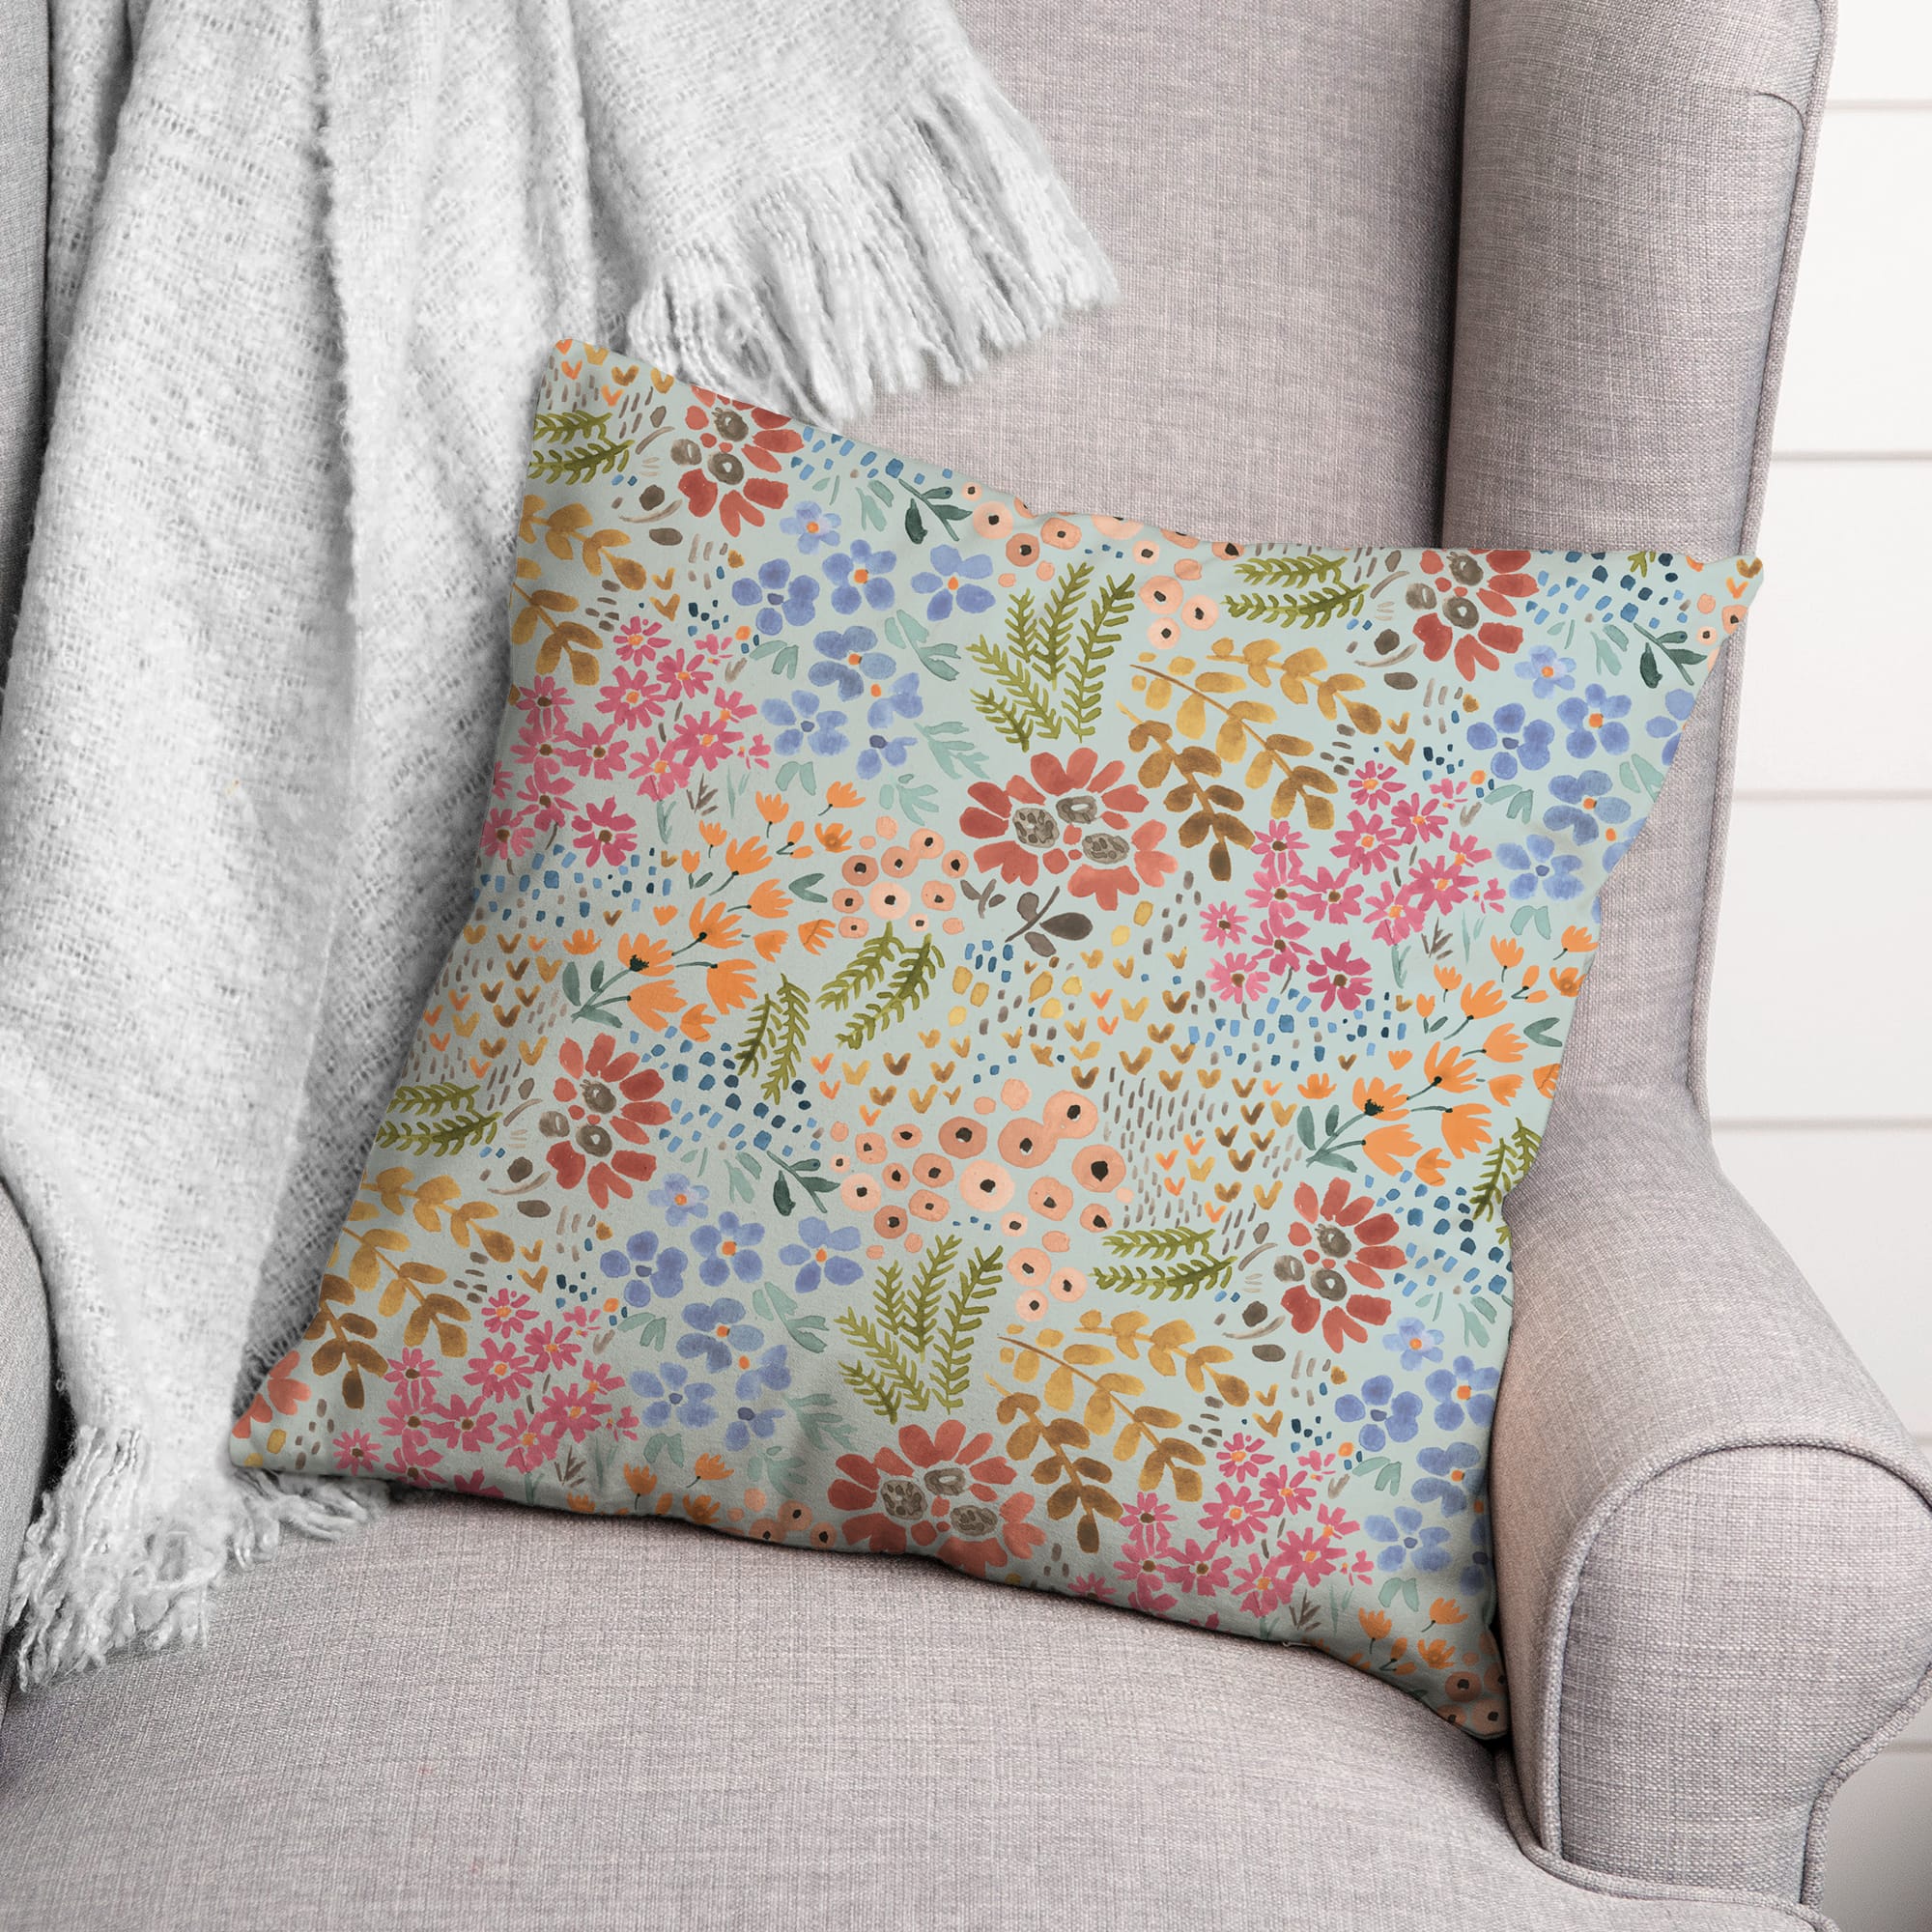 Wild Flower Floral Square Throw Pillow